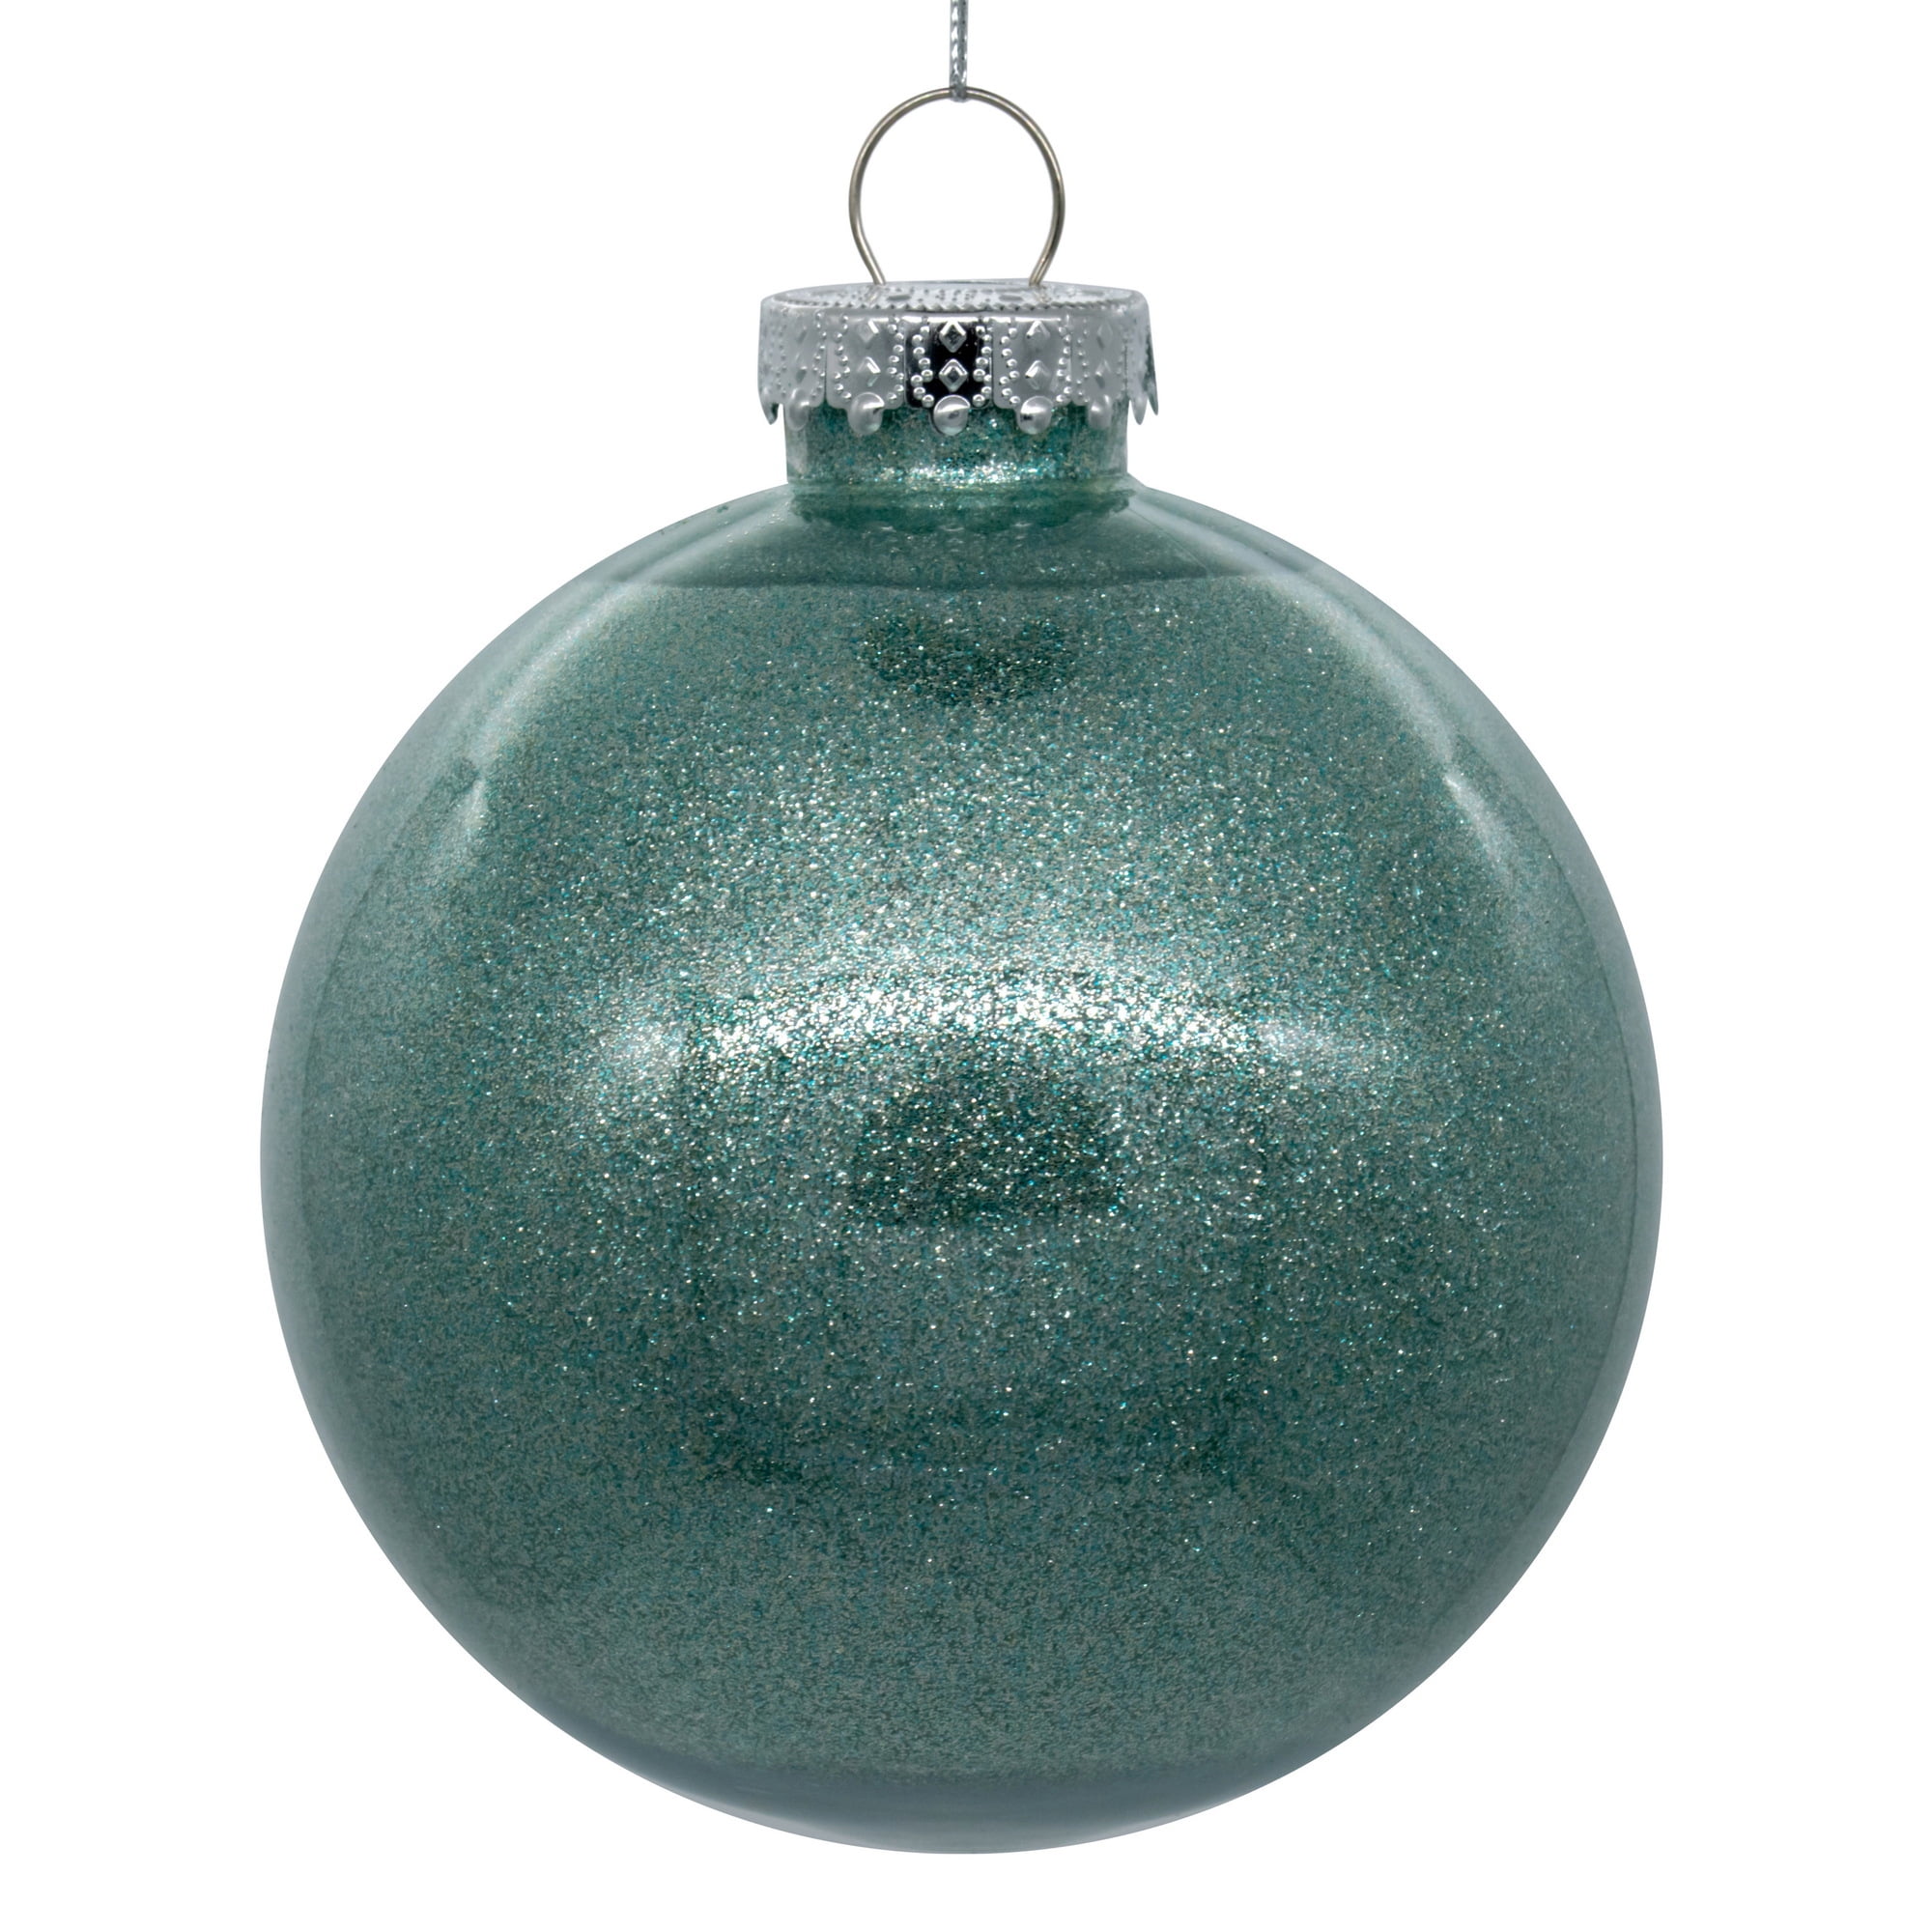 Vickerman 4 Clear Ball Christmas Ornament with Cobalt Blue Glitter Interior This Item Comes with 6 Ornaments per Unit.